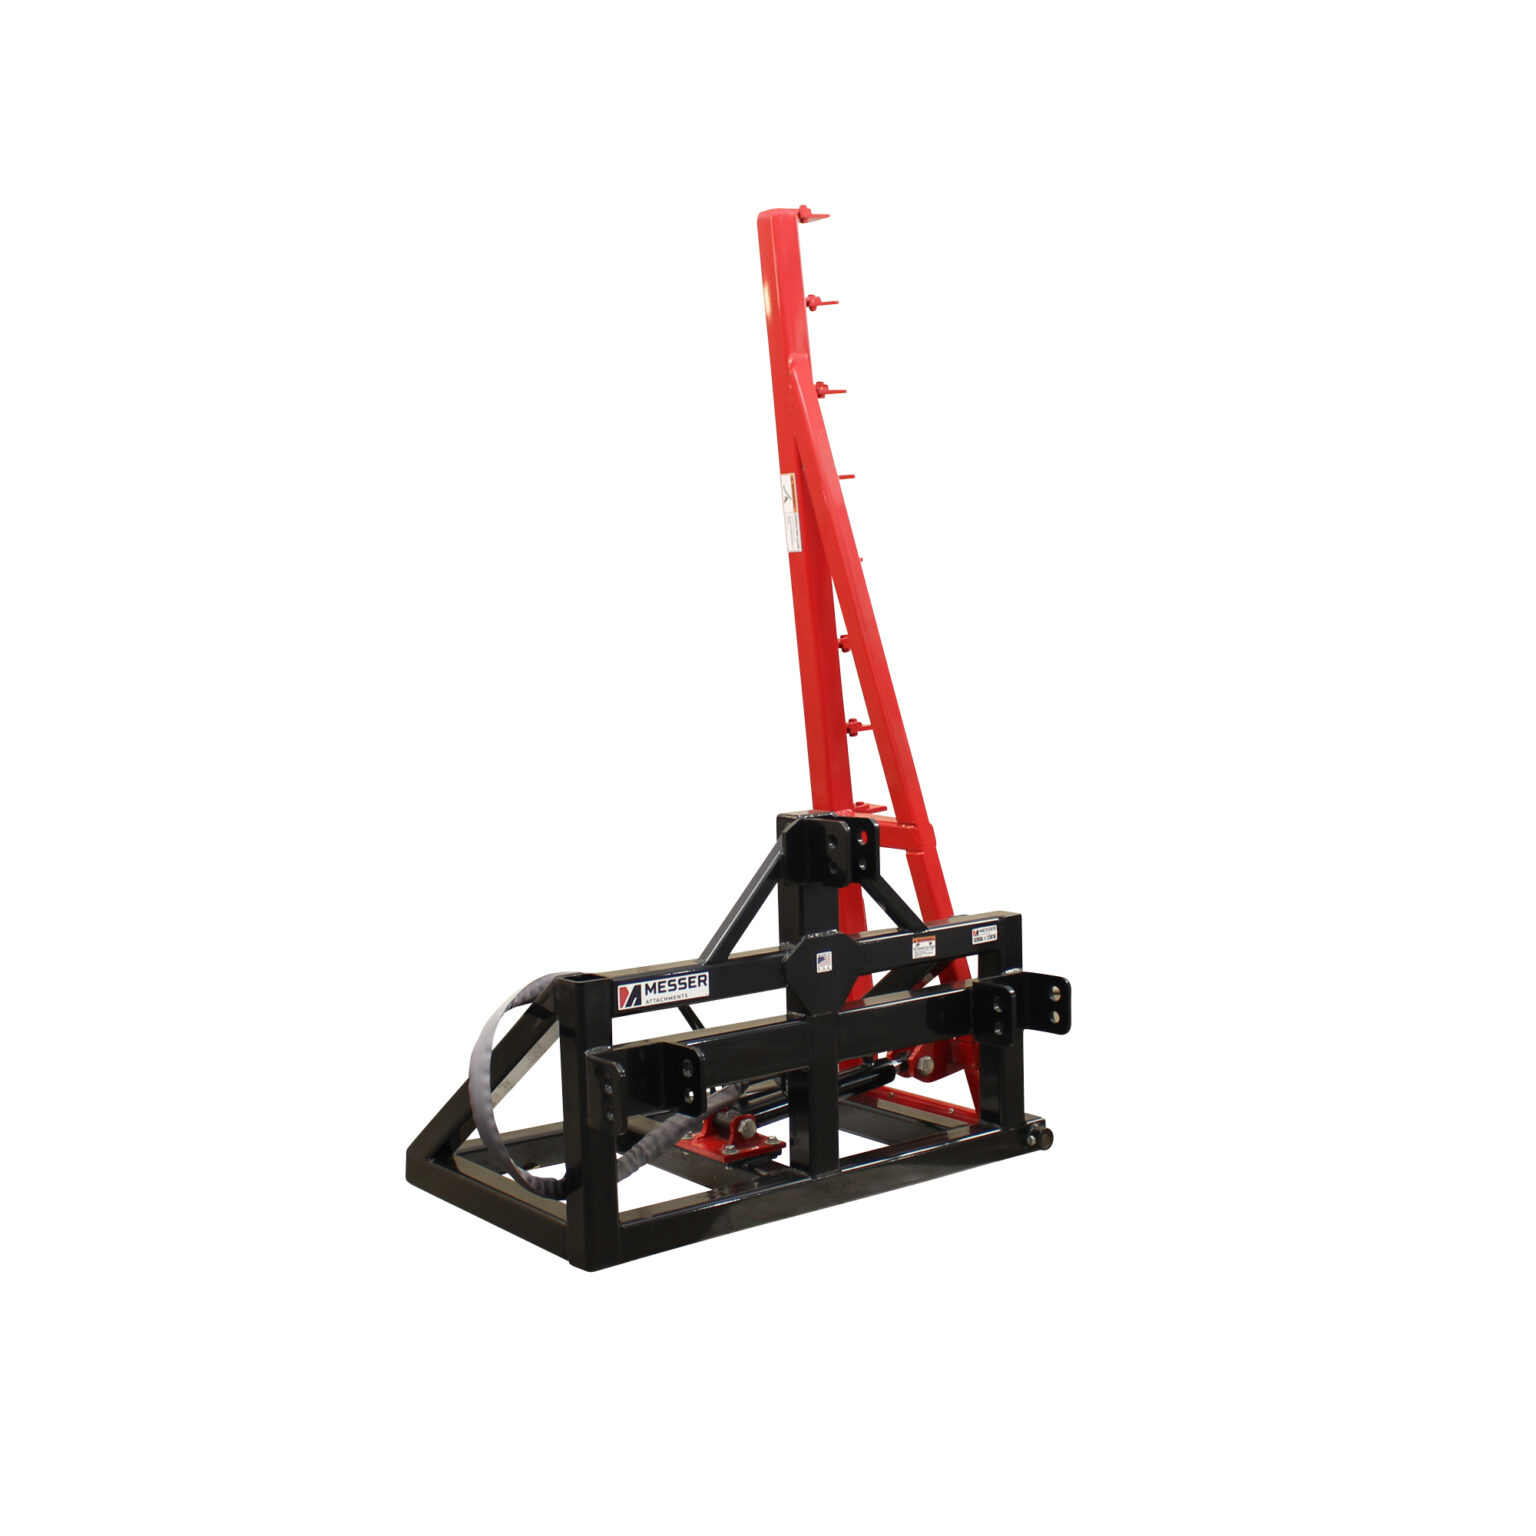 Standard or high flow loaders freestall groomer attachments for skid loaders by messeer attachments